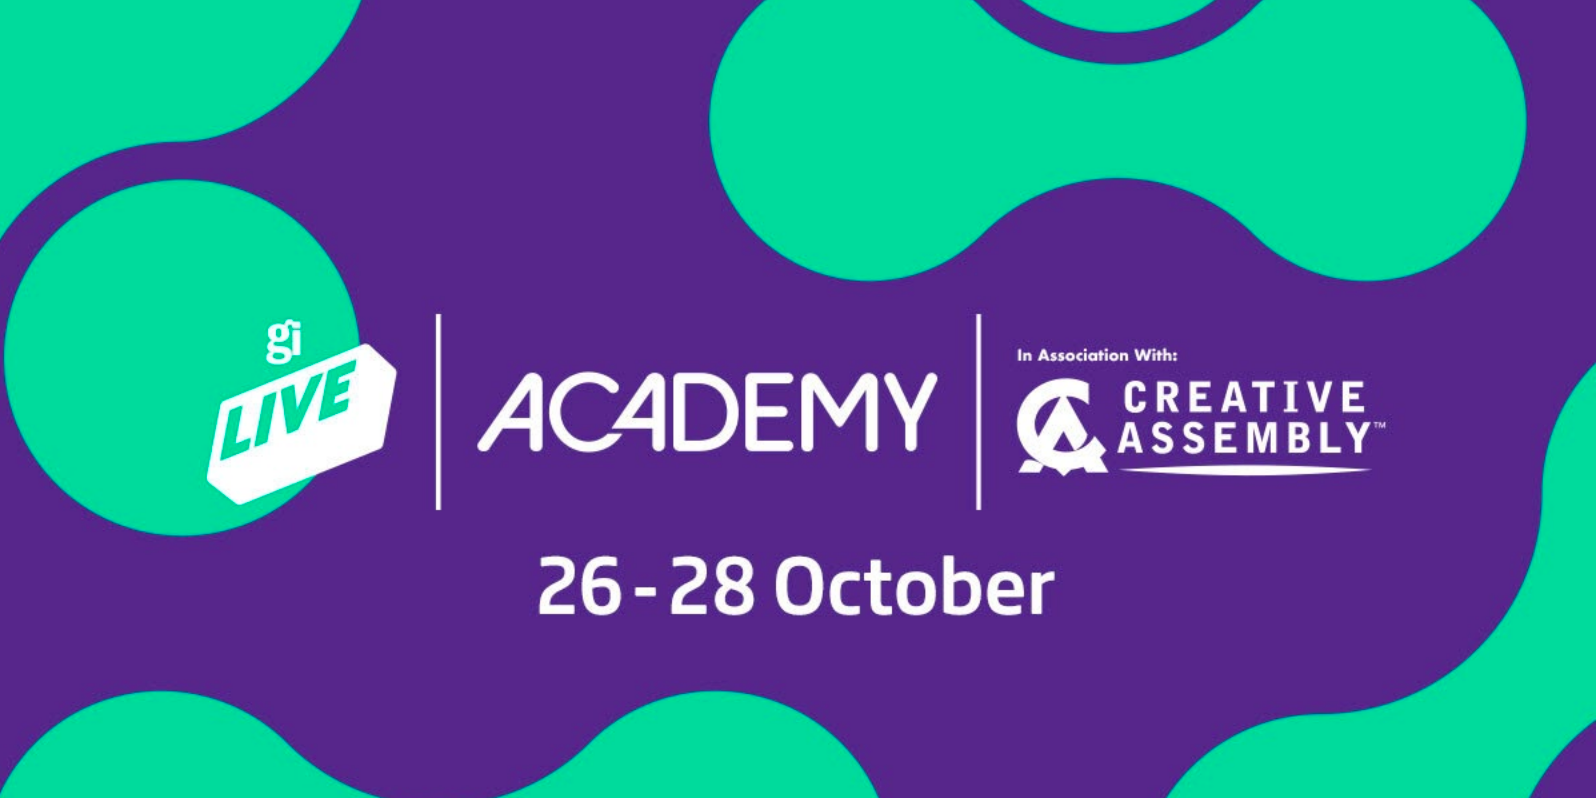 Image for GamesIndustry.biz and Creative Assembly team up on free student event